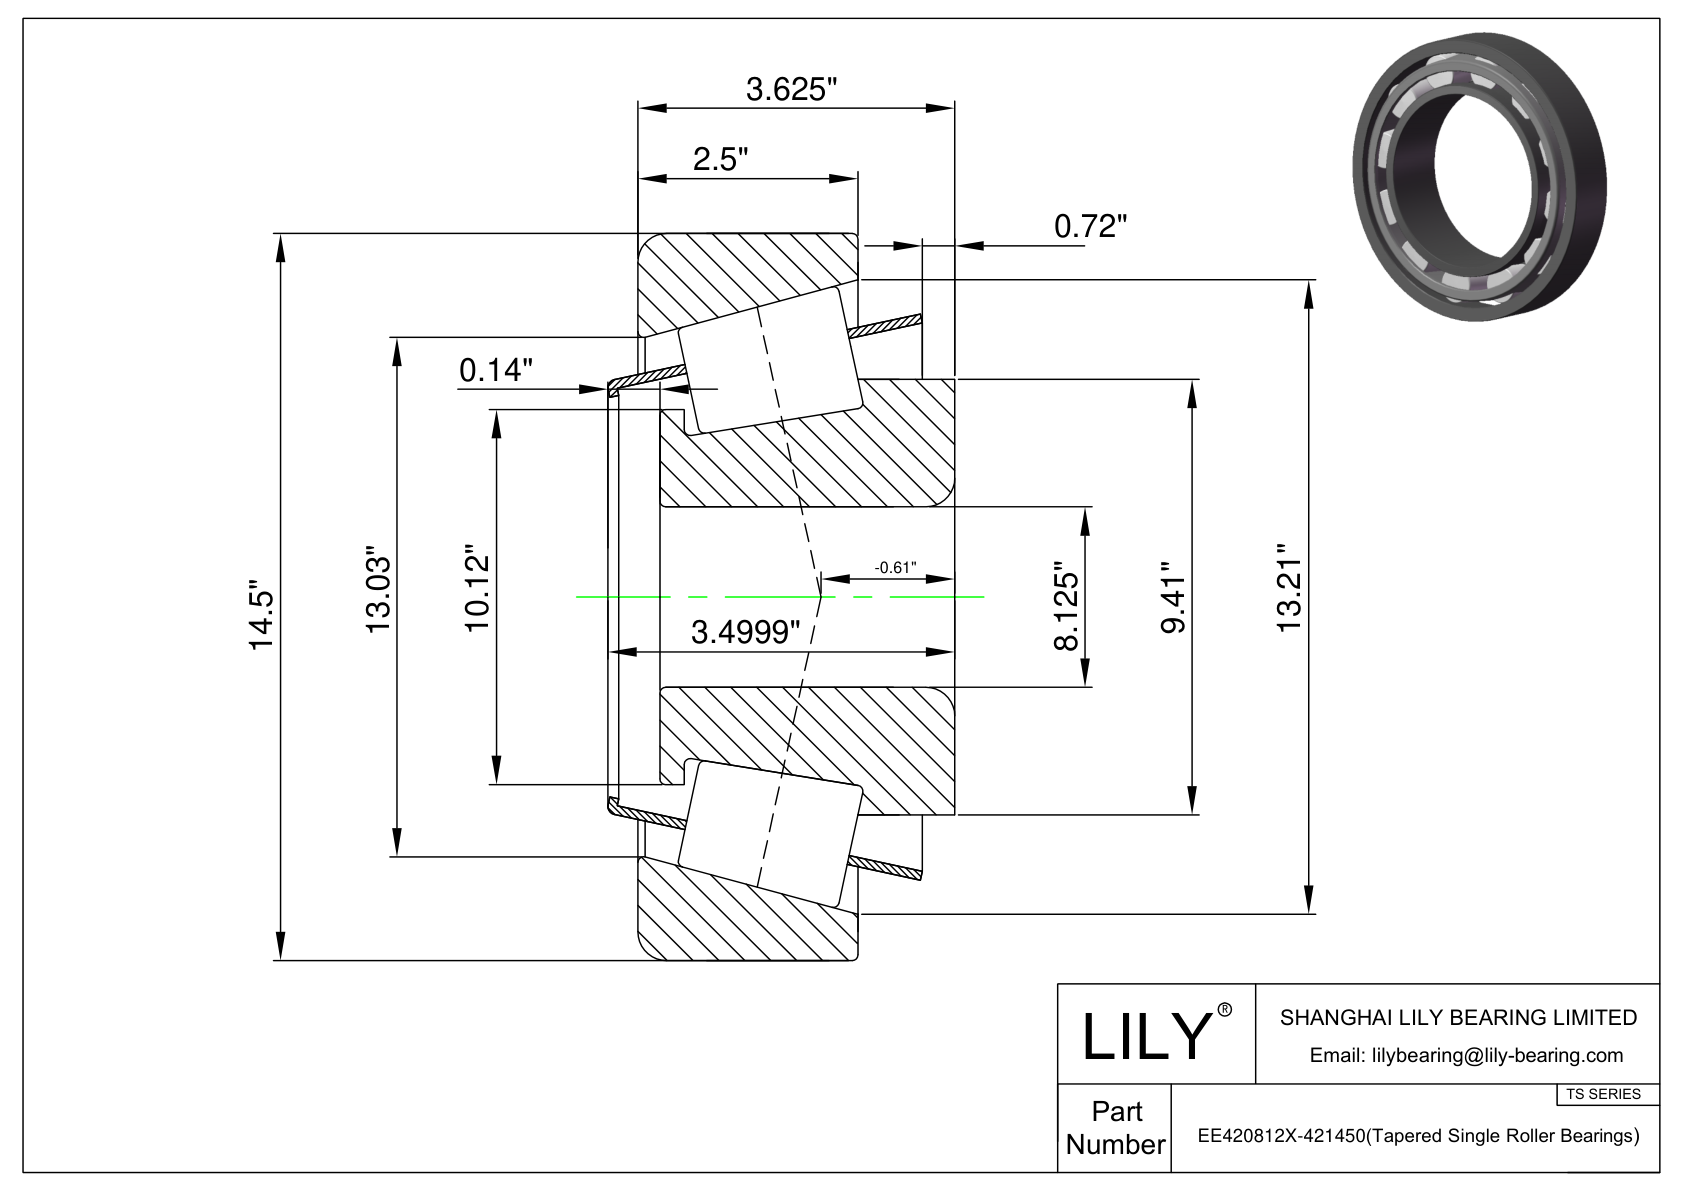 EE420812X-421450 TS (Tapered Single Roller Bearings) (Imperial) cad drawing